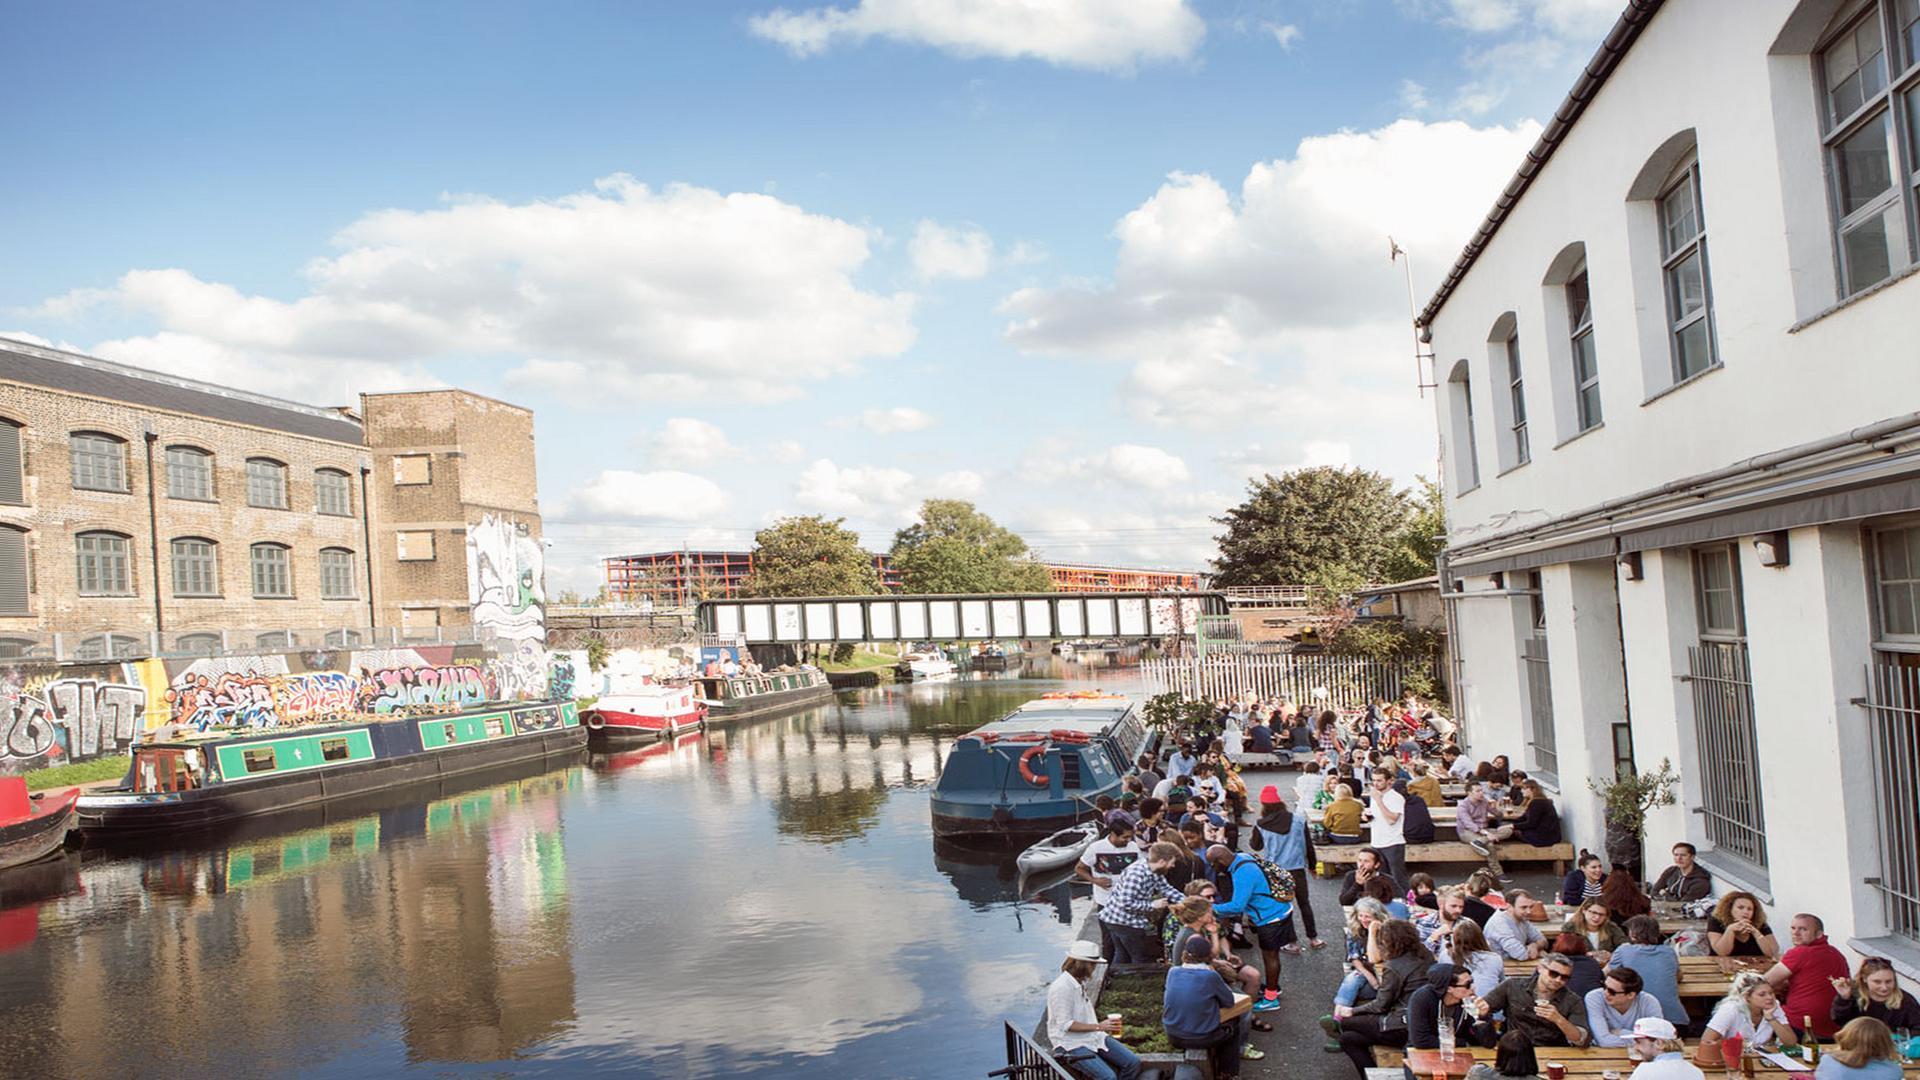 The East London Guide